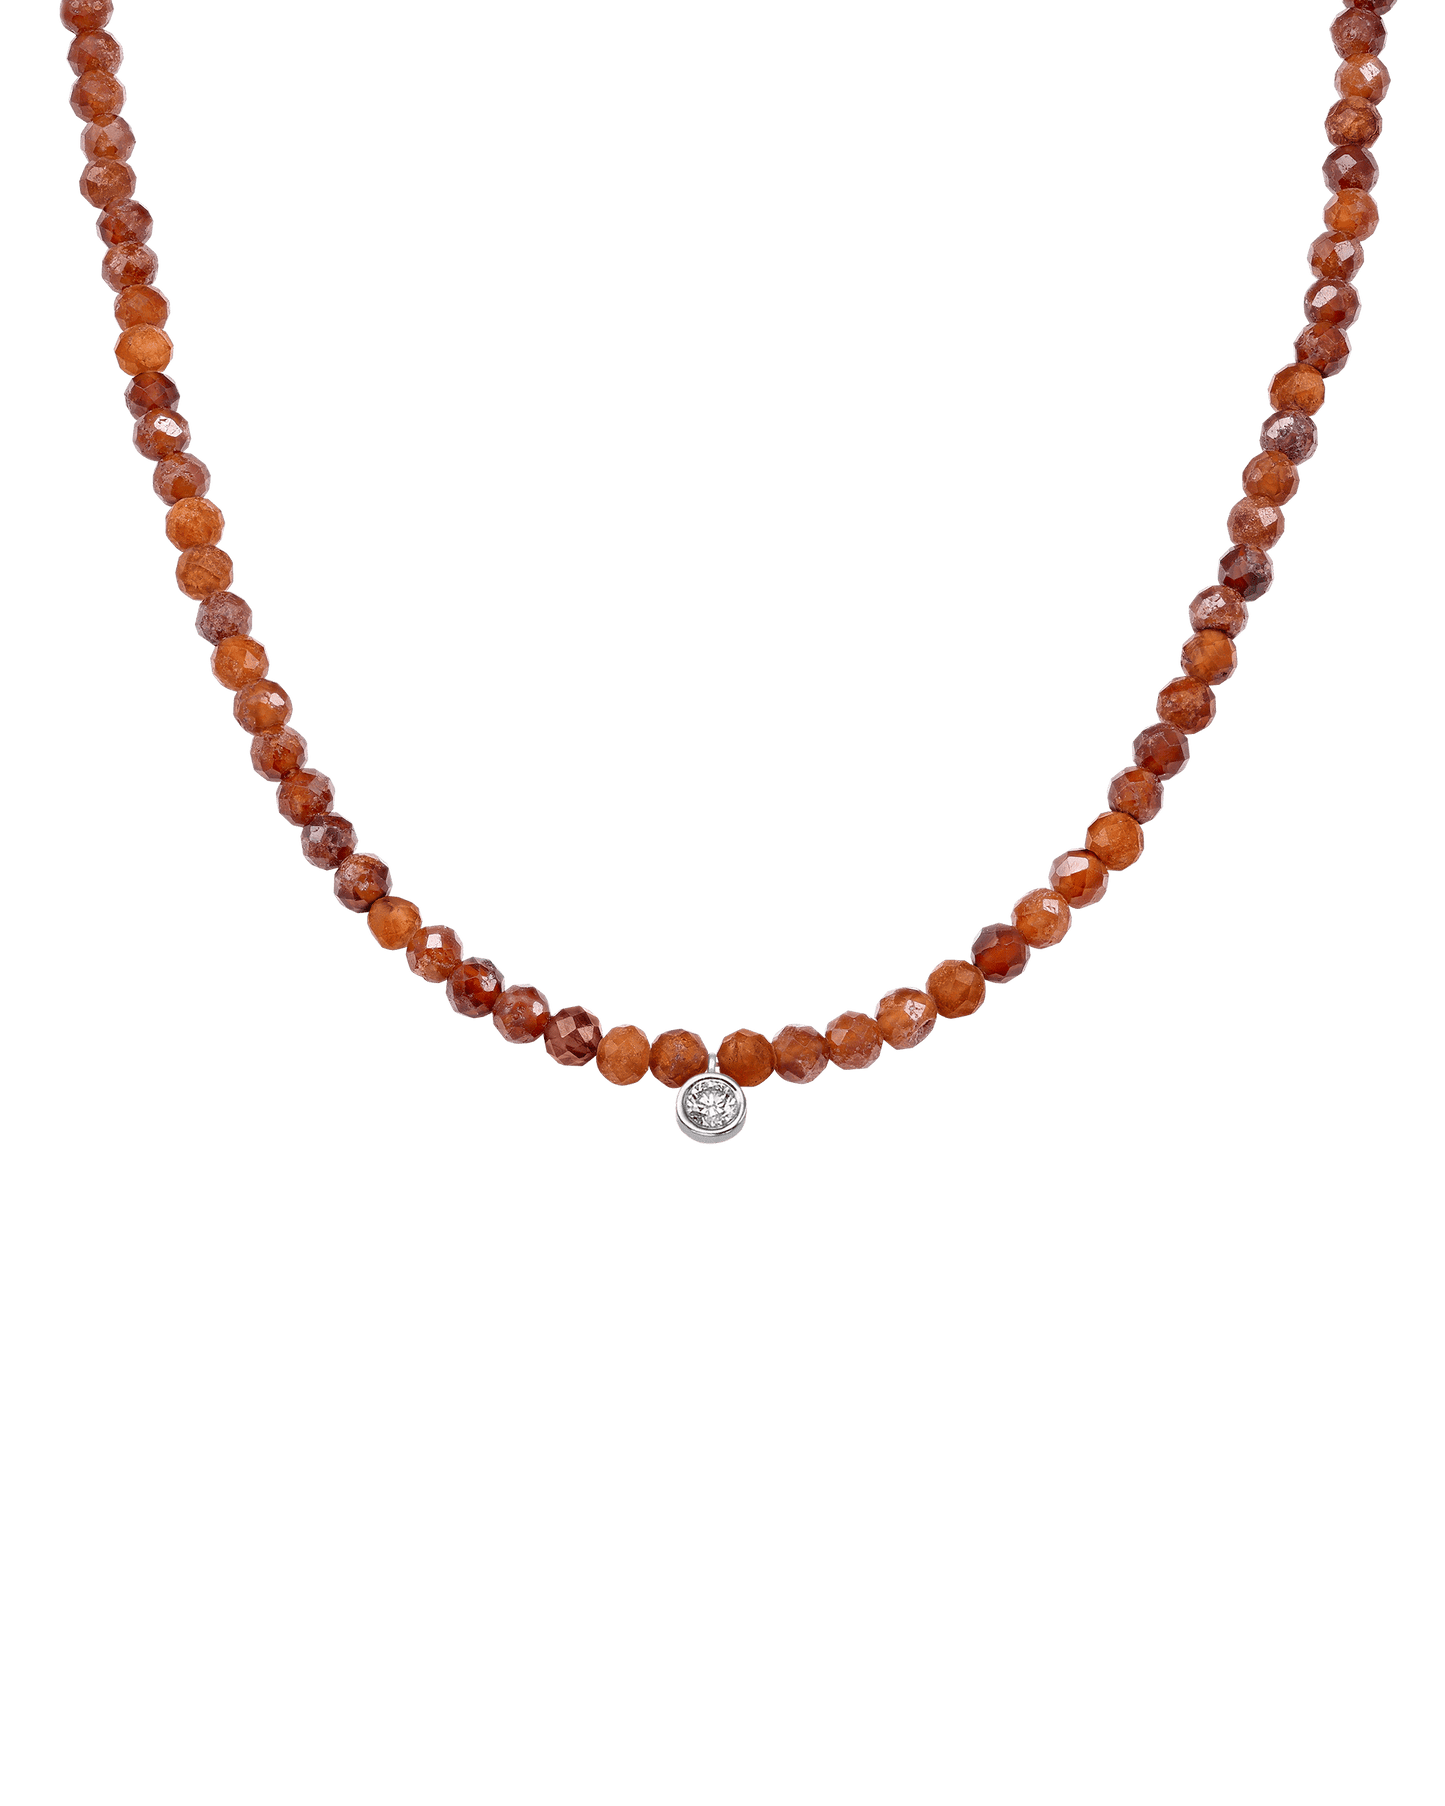 The Gemstone & Diamond Necklace - 14K White Gold Necklaces 14K Solid Gold Natural Garnet Large: 0.1ct 14"